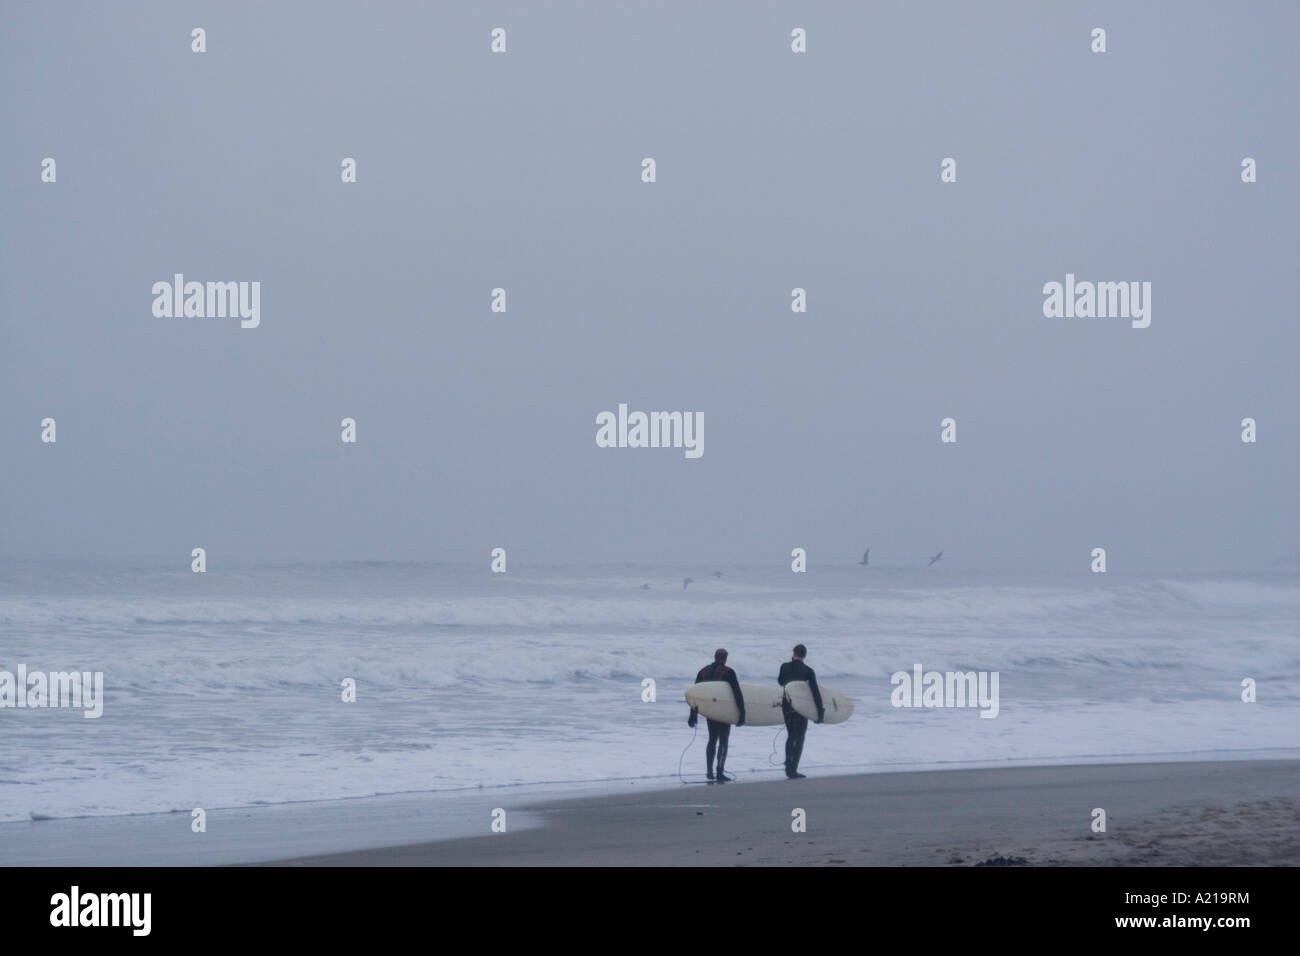 Two surfers walking at dusk along the beach in Oceanside California Stock Photo